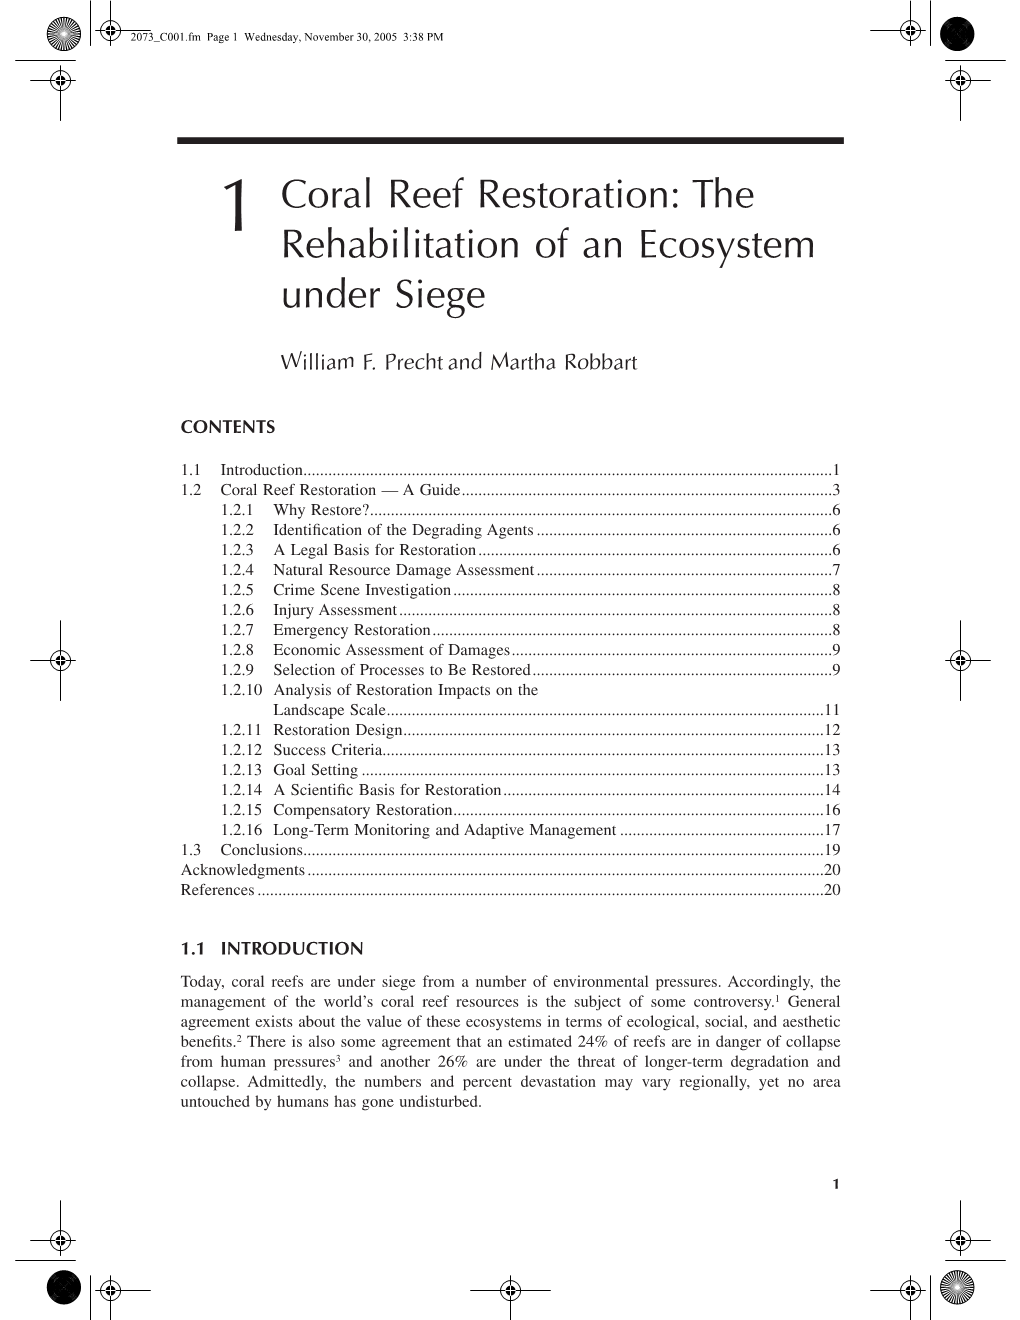 1 Coral Reef Restoration: the Rehabilitation of an Ecosystem